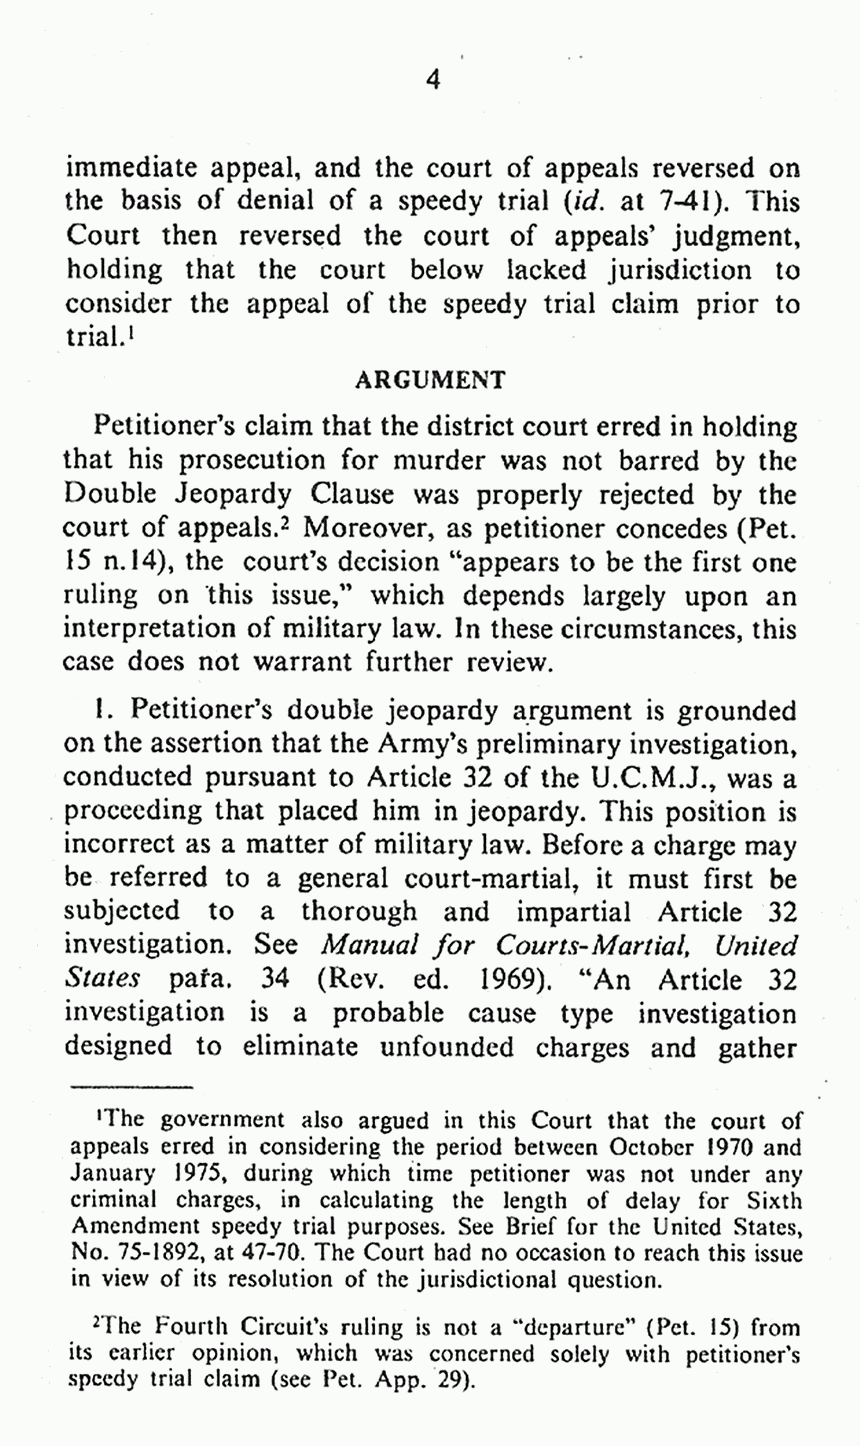 February 1979: Supreme Court of the United States, On Petition for Writ of Certiorari to the U. S. Court of Appeals for the 4th Circuit: Brief for the United States in Opposition, p. 4 of 9